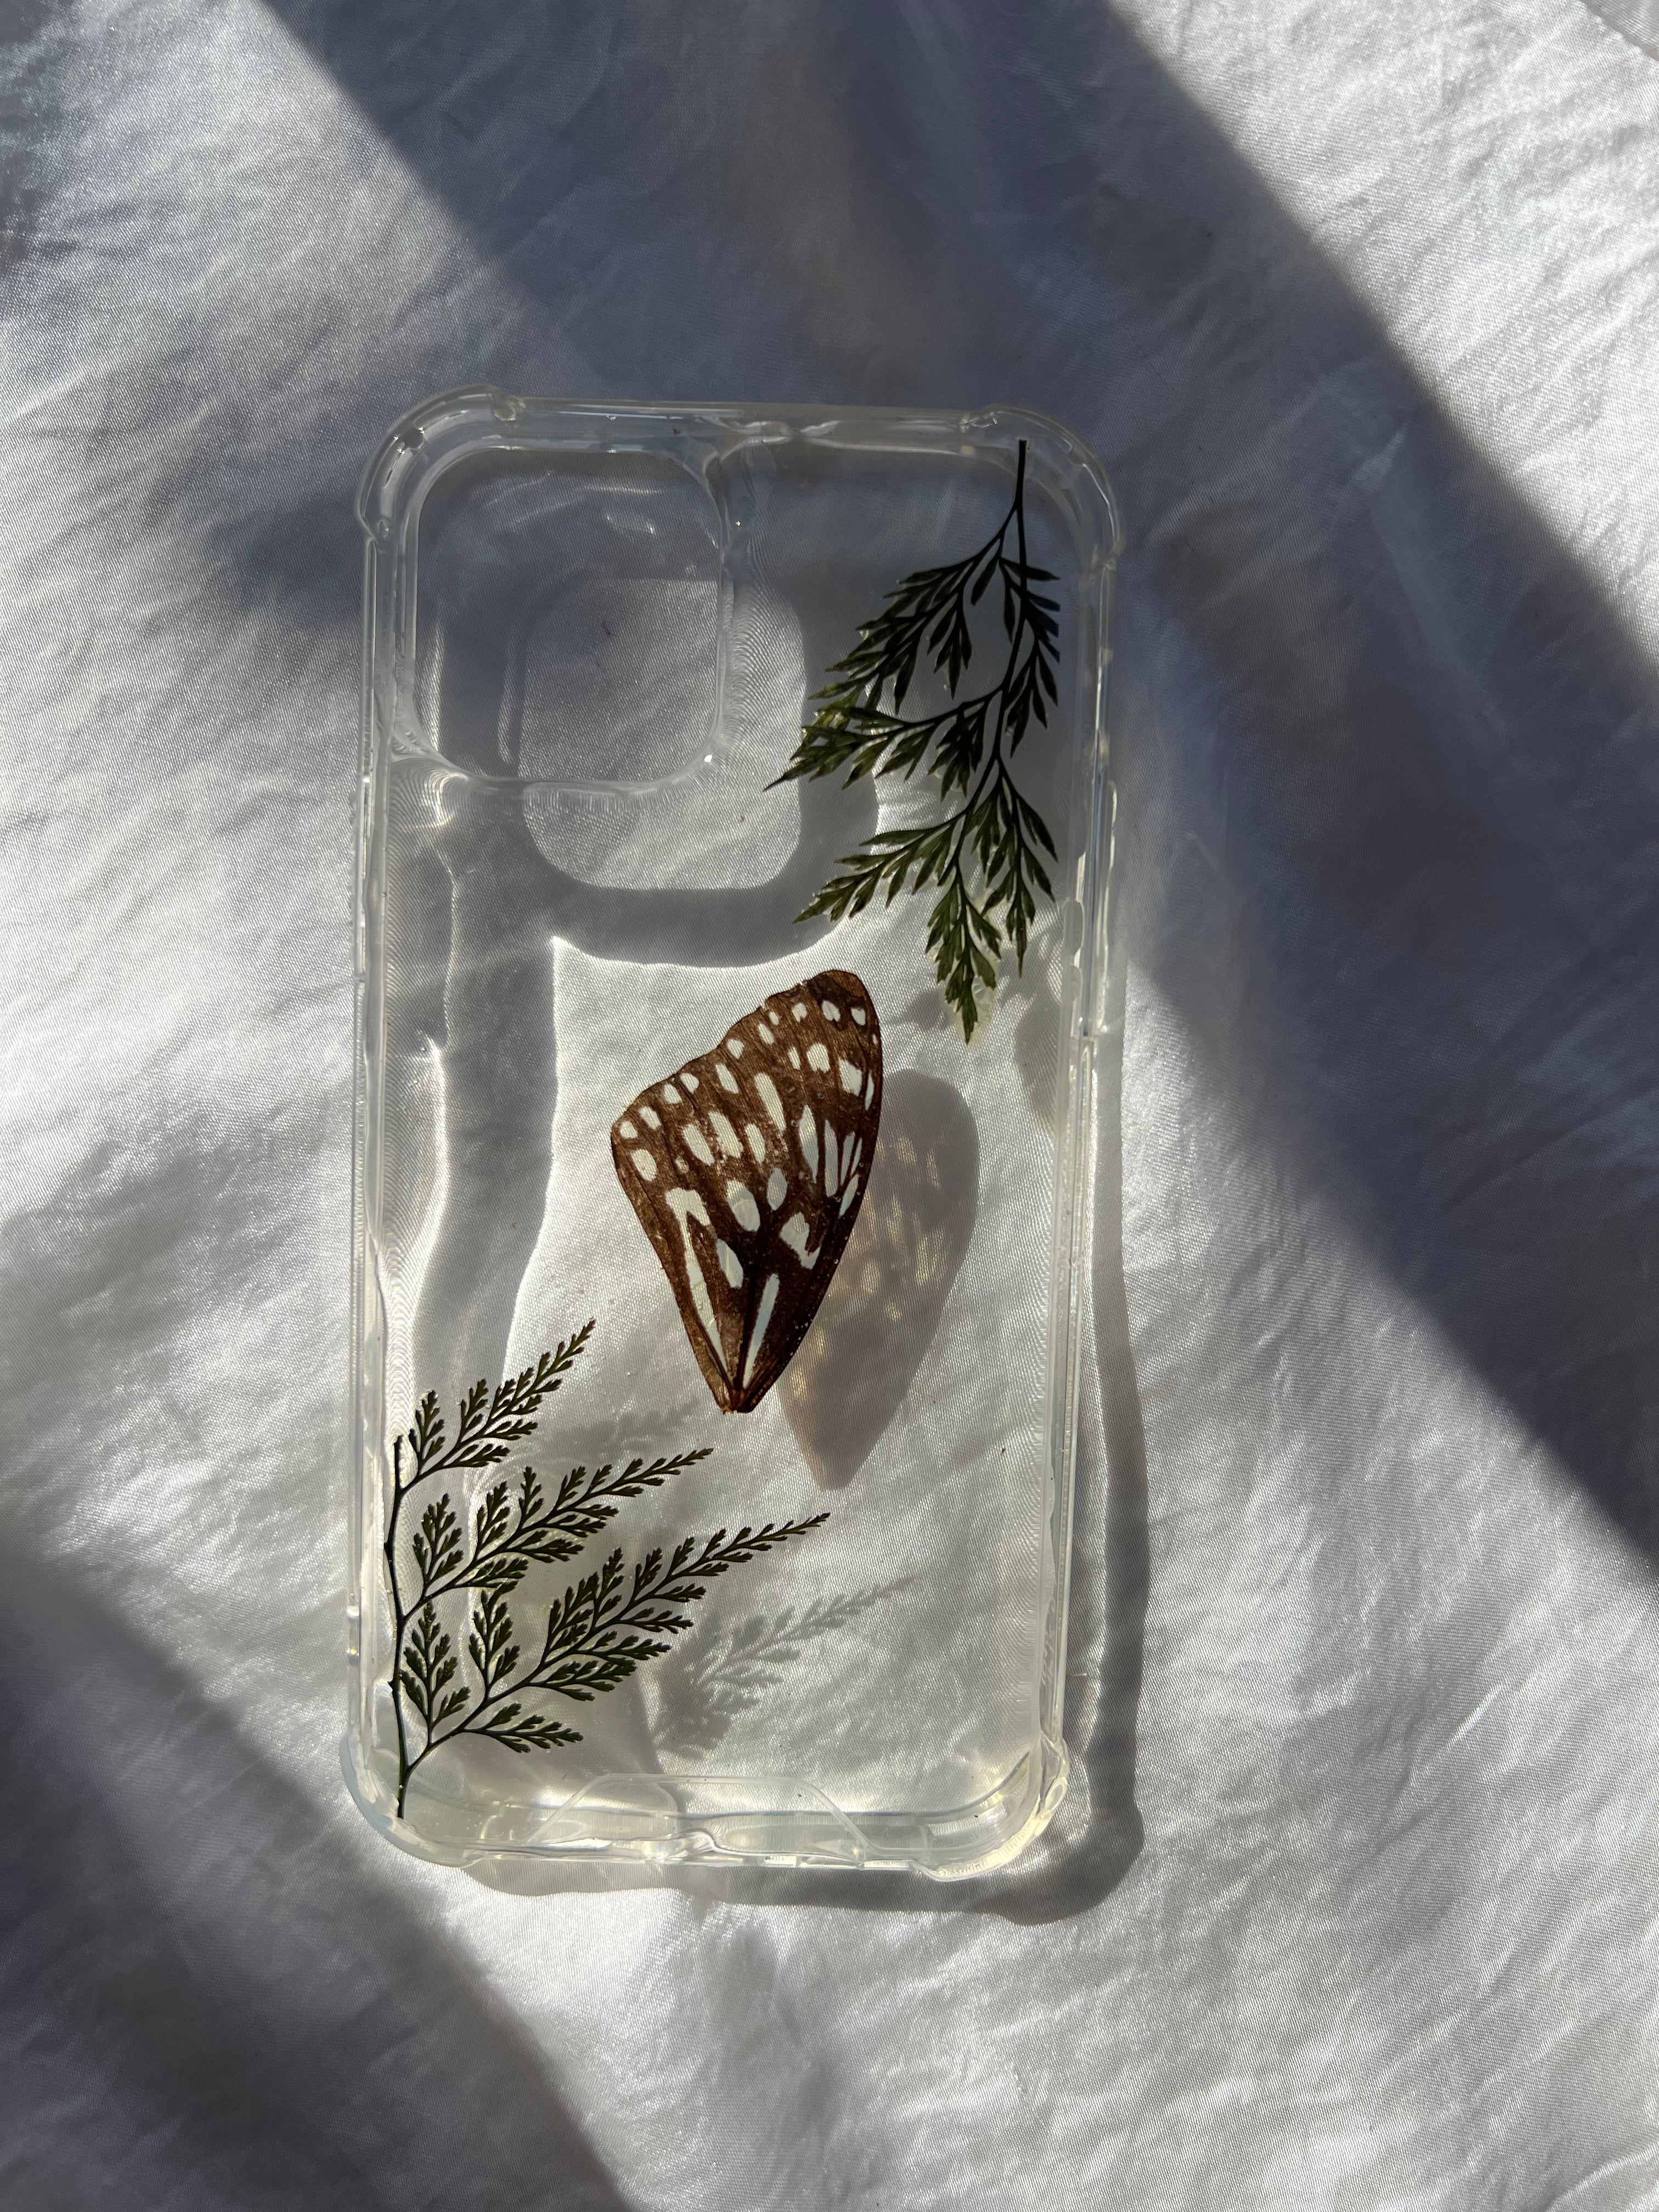 pressed flower phone case, botanical phone case, pressed flower art, handmade phone case, iphone 12 case, iphone 12 pro case, real butterfly wing, preserved butterfly wing, preserved ferns, botanical preservation, real pressed flower iphone 12 phone case, australian made, handmade